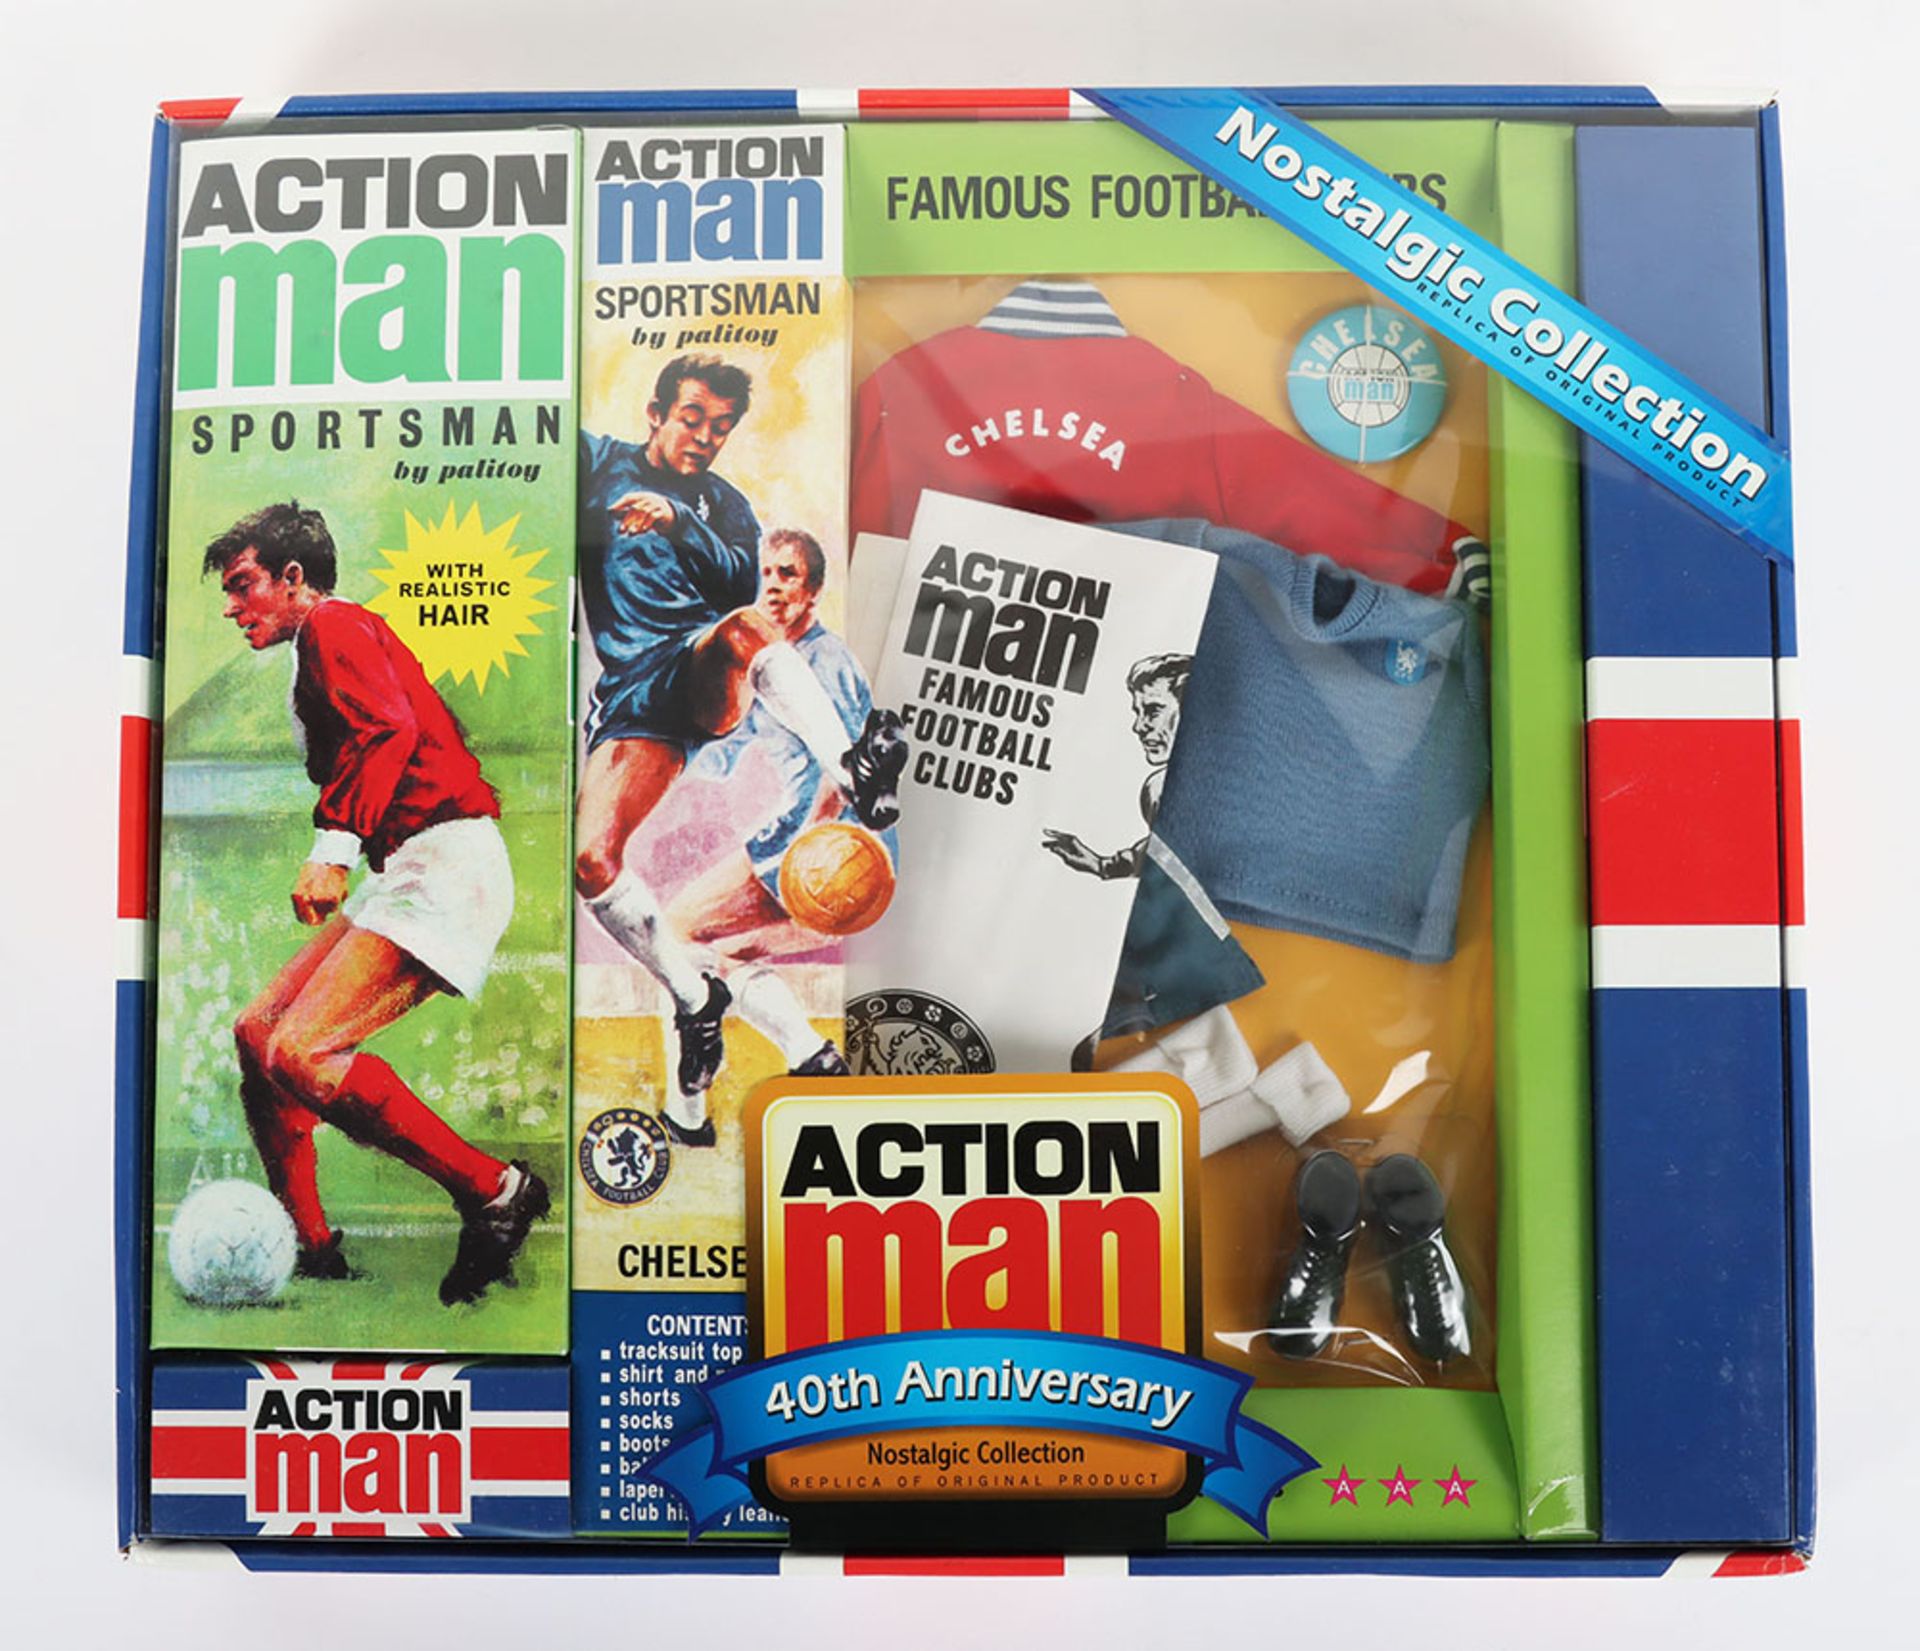 Action Man Palitoy Sportsman Famous Football Clubs Chelsea 40th Anniversary Nostalgic Collection